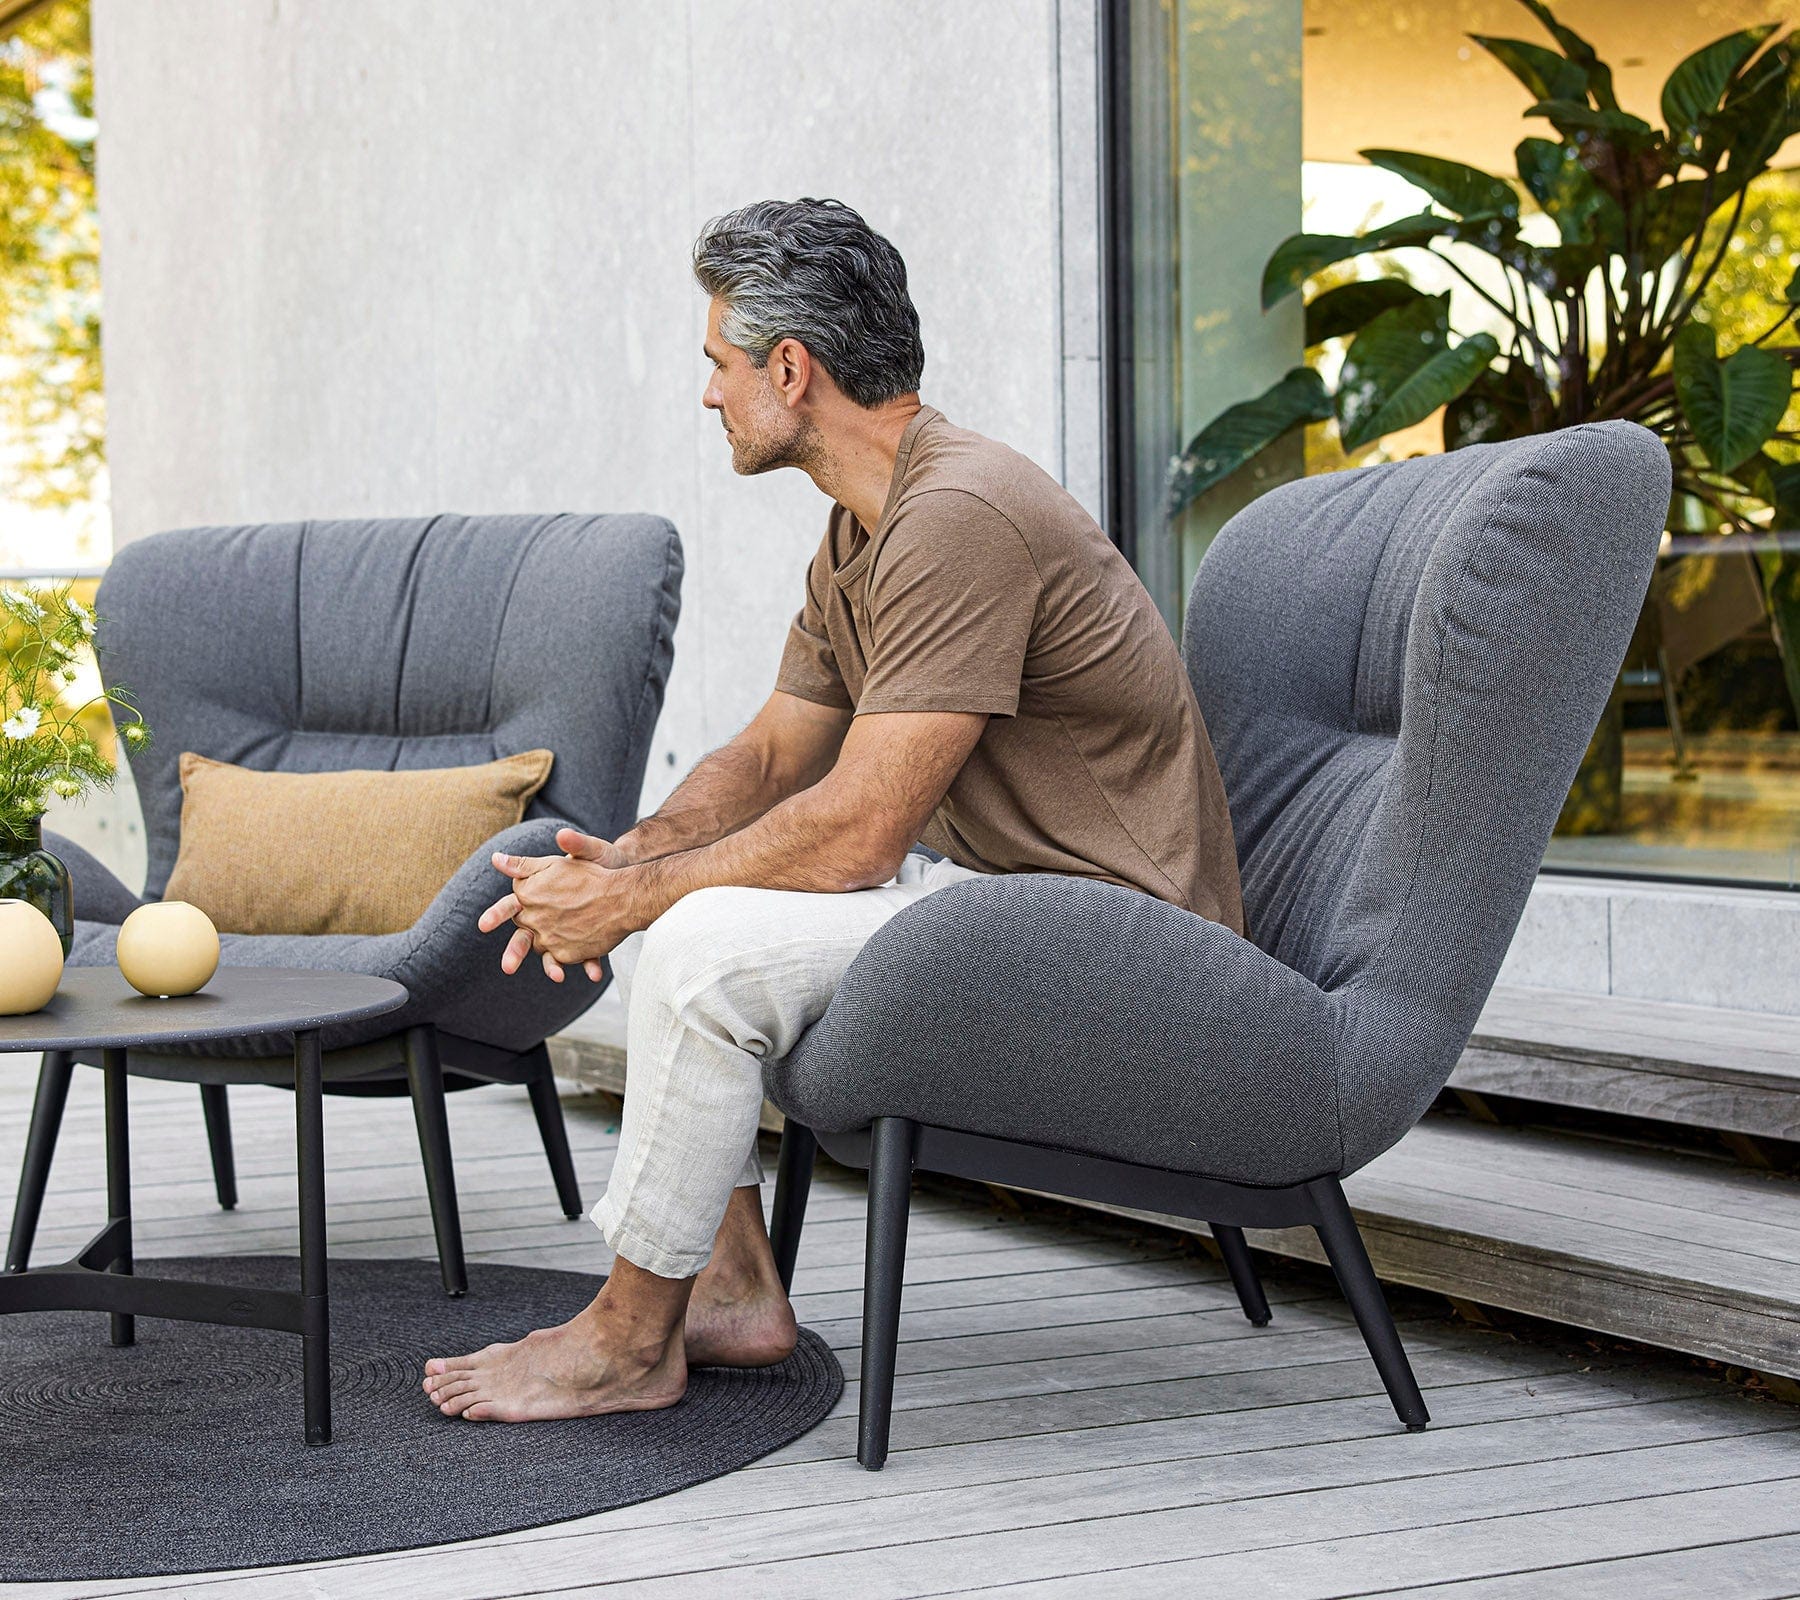 Cane-Line Denmark Grey - Cane-line AirTouch Serene lounge chair incl. Cane-line AirTouch cushions (54400)